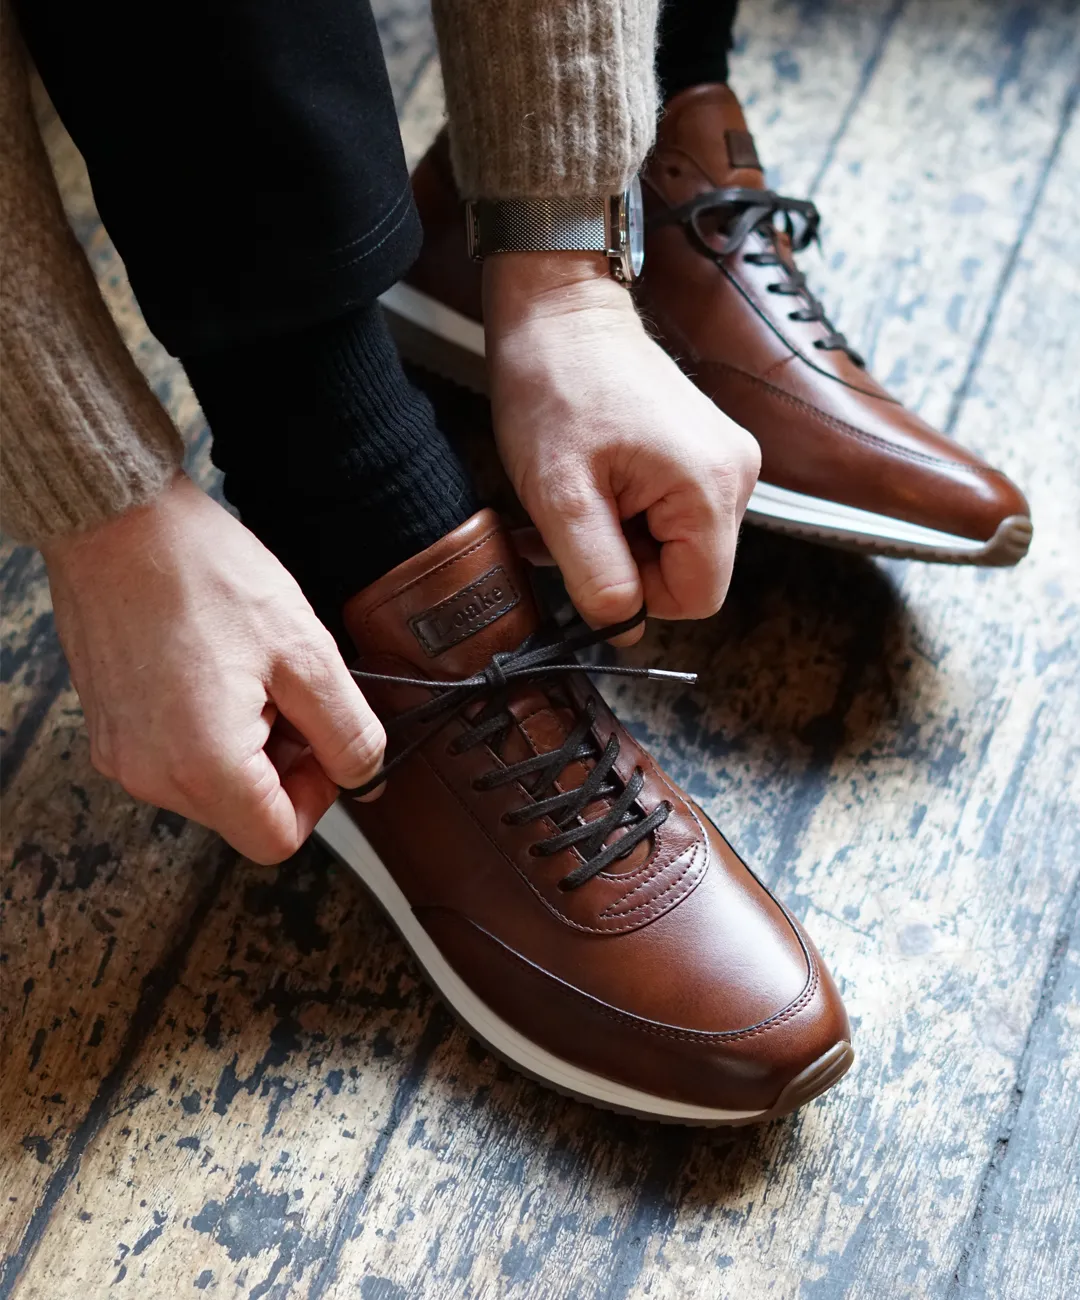 Man tying up his trainers in a public setting. Shoes shown are Bannister in cedar calf leather